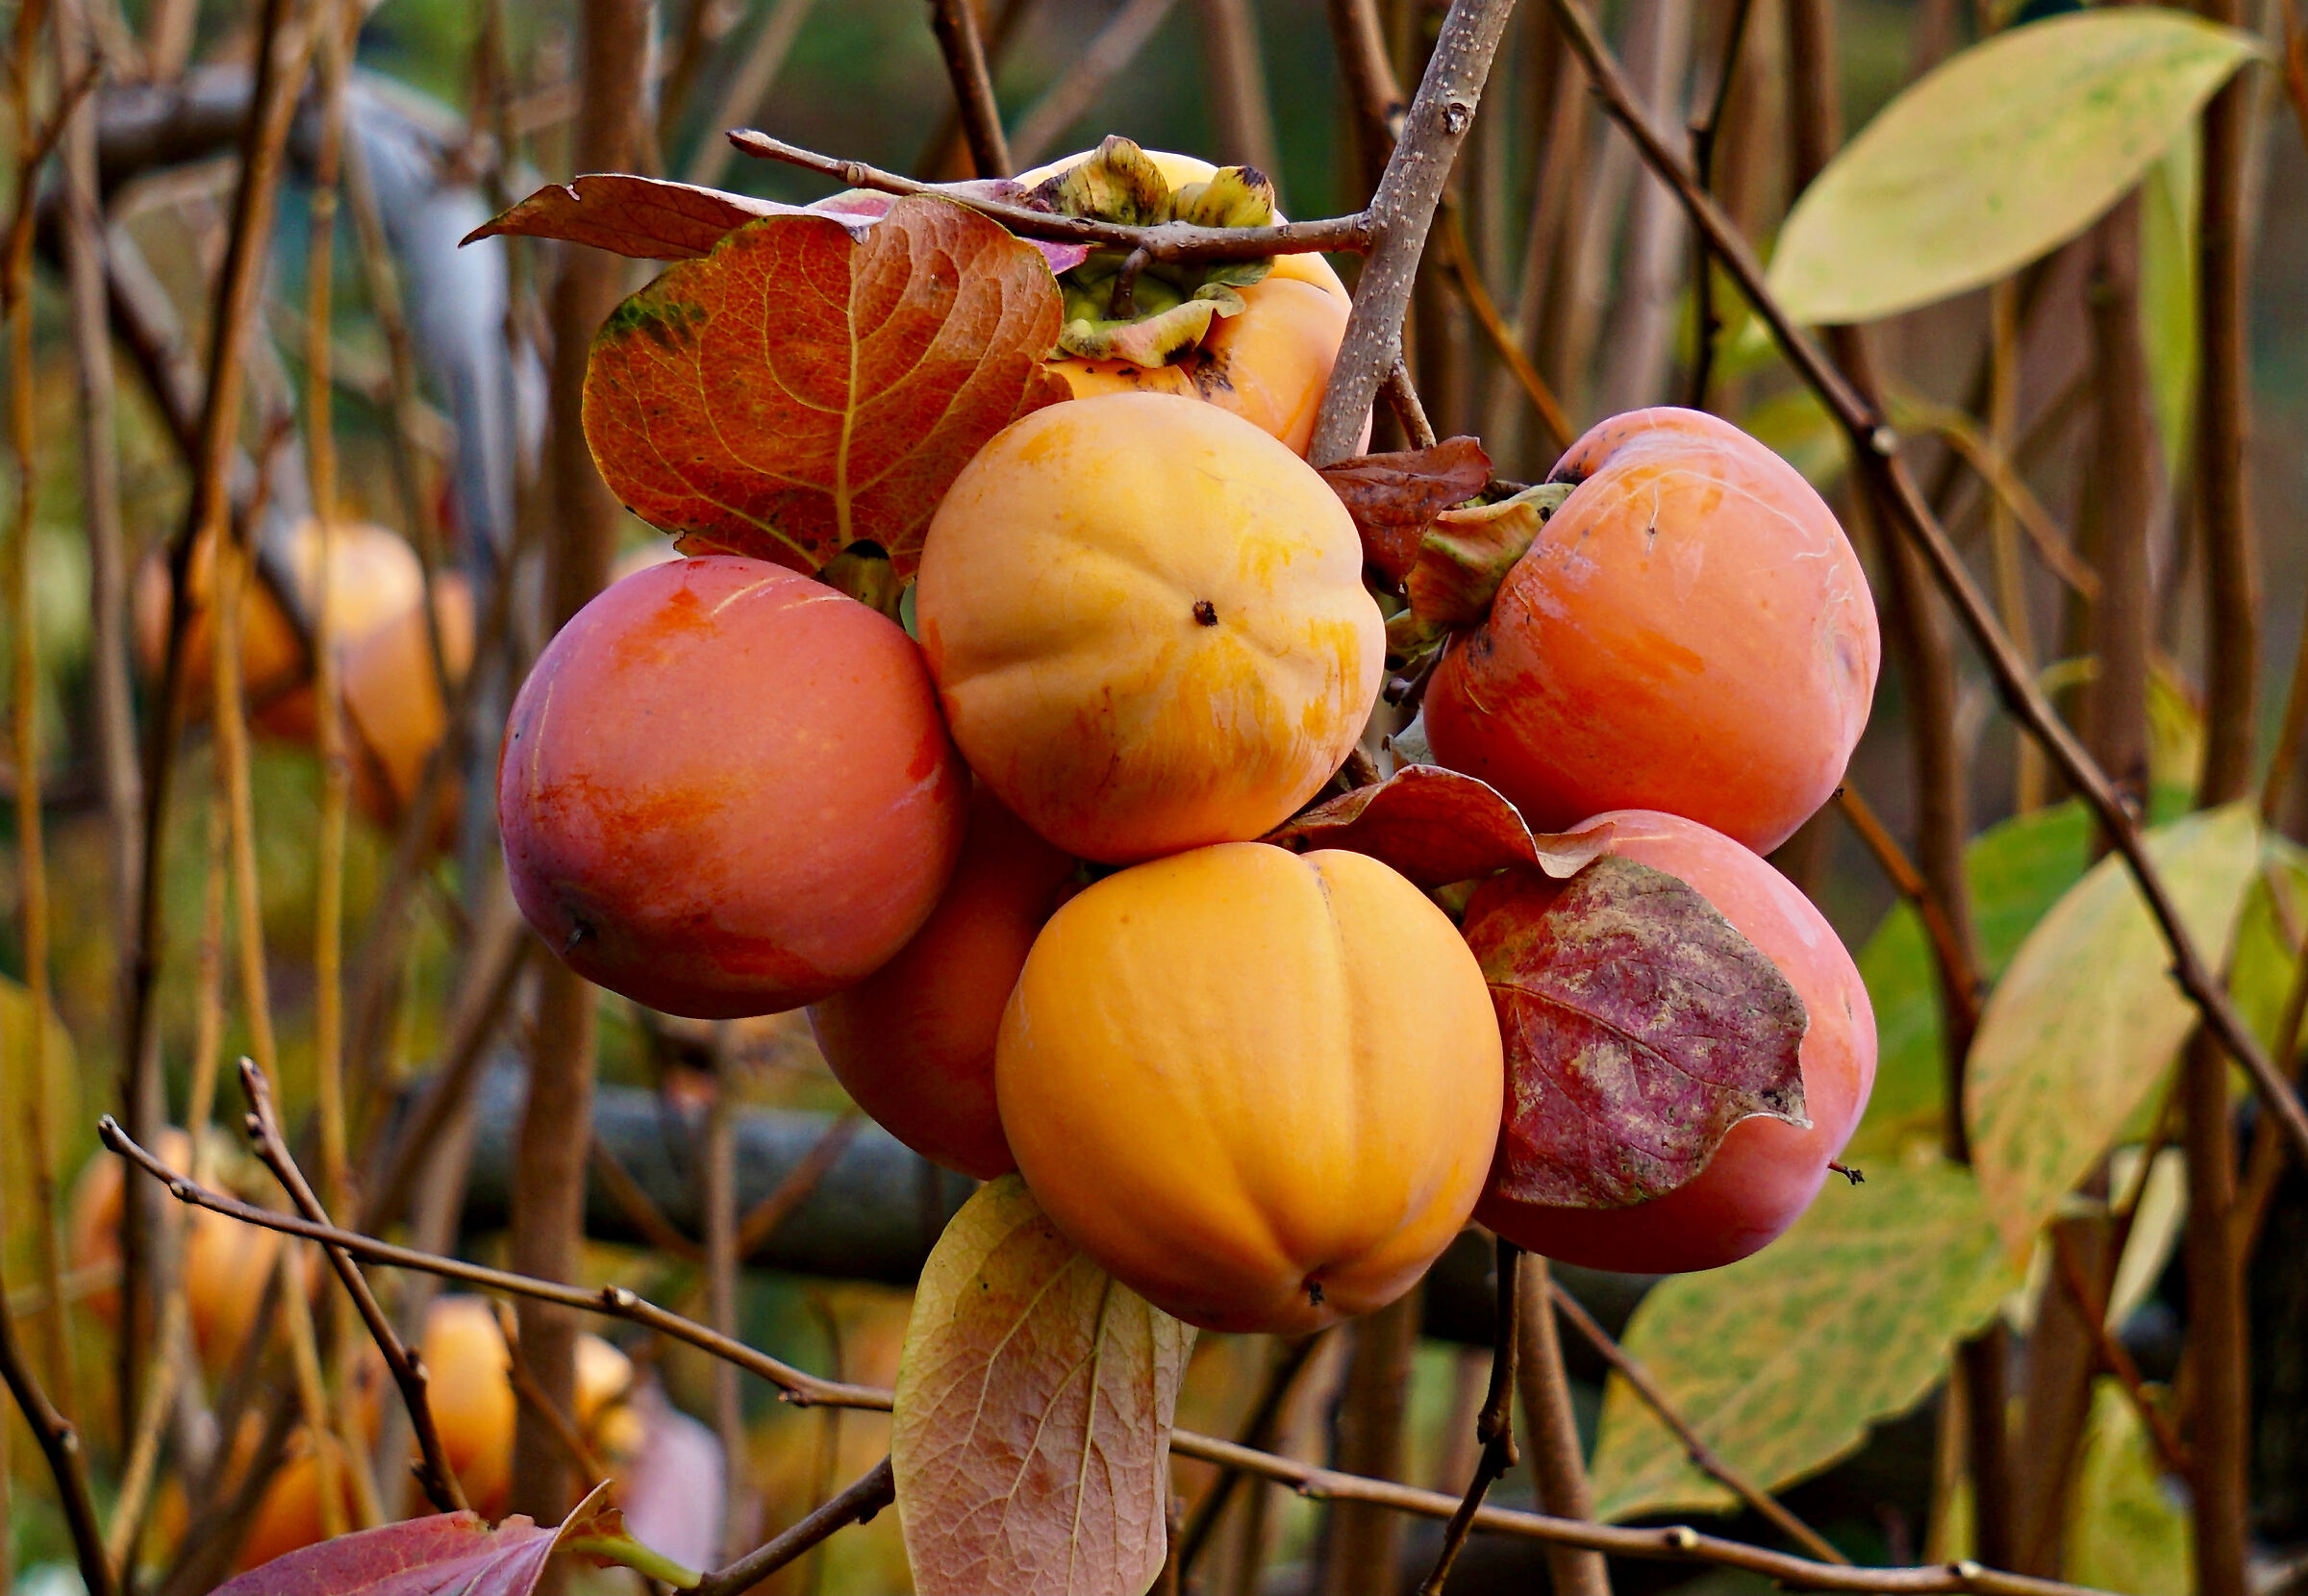 In the time of persimmon...